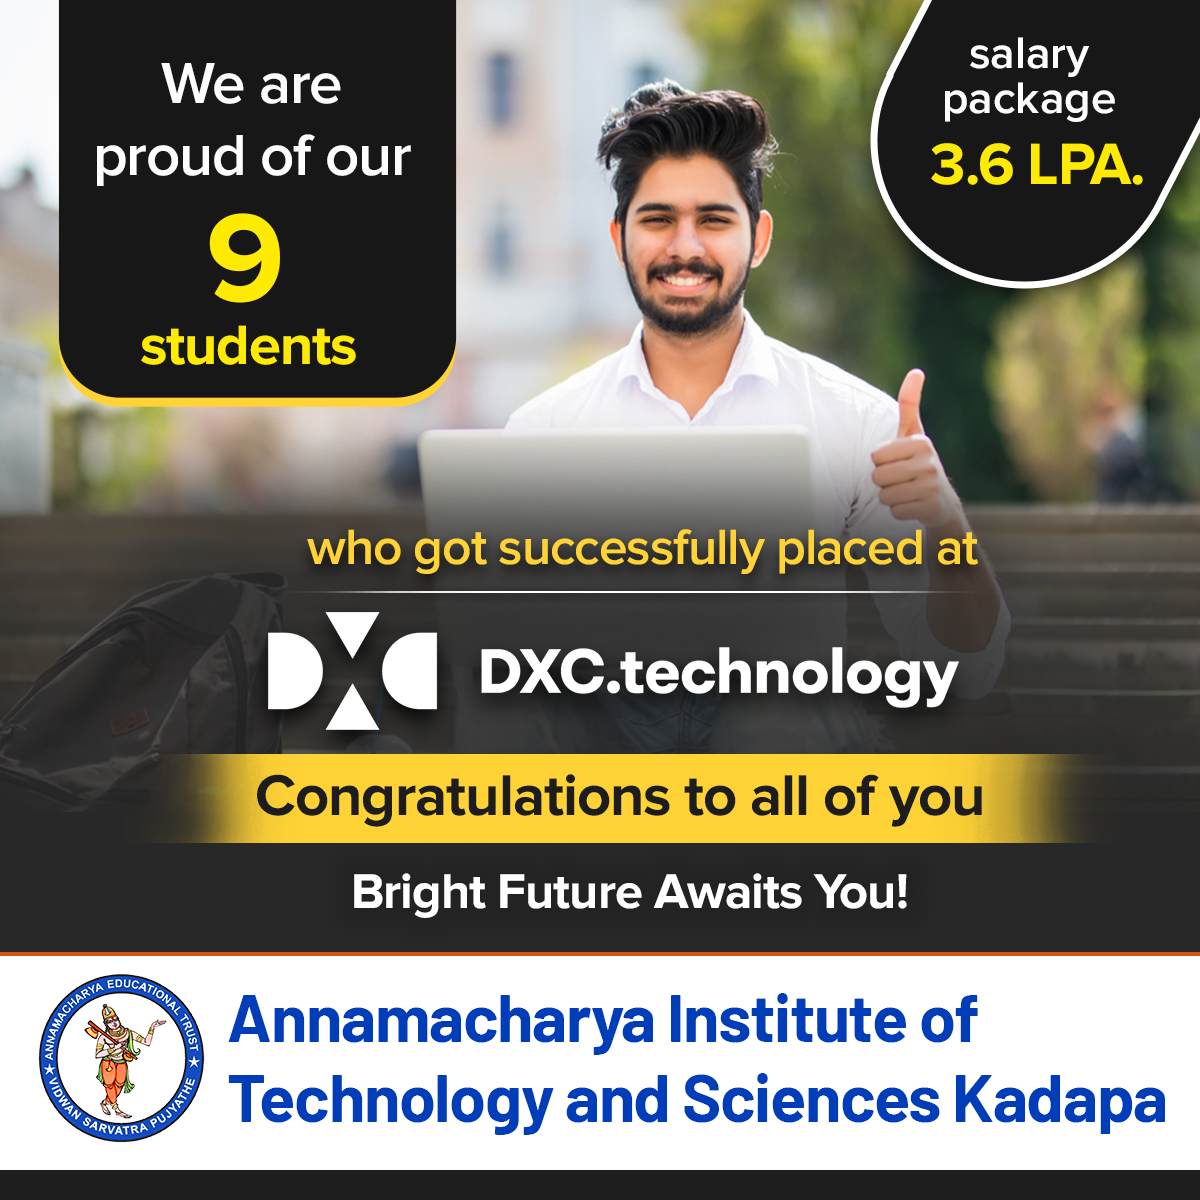 9 students successfully placed in DXC.Technology